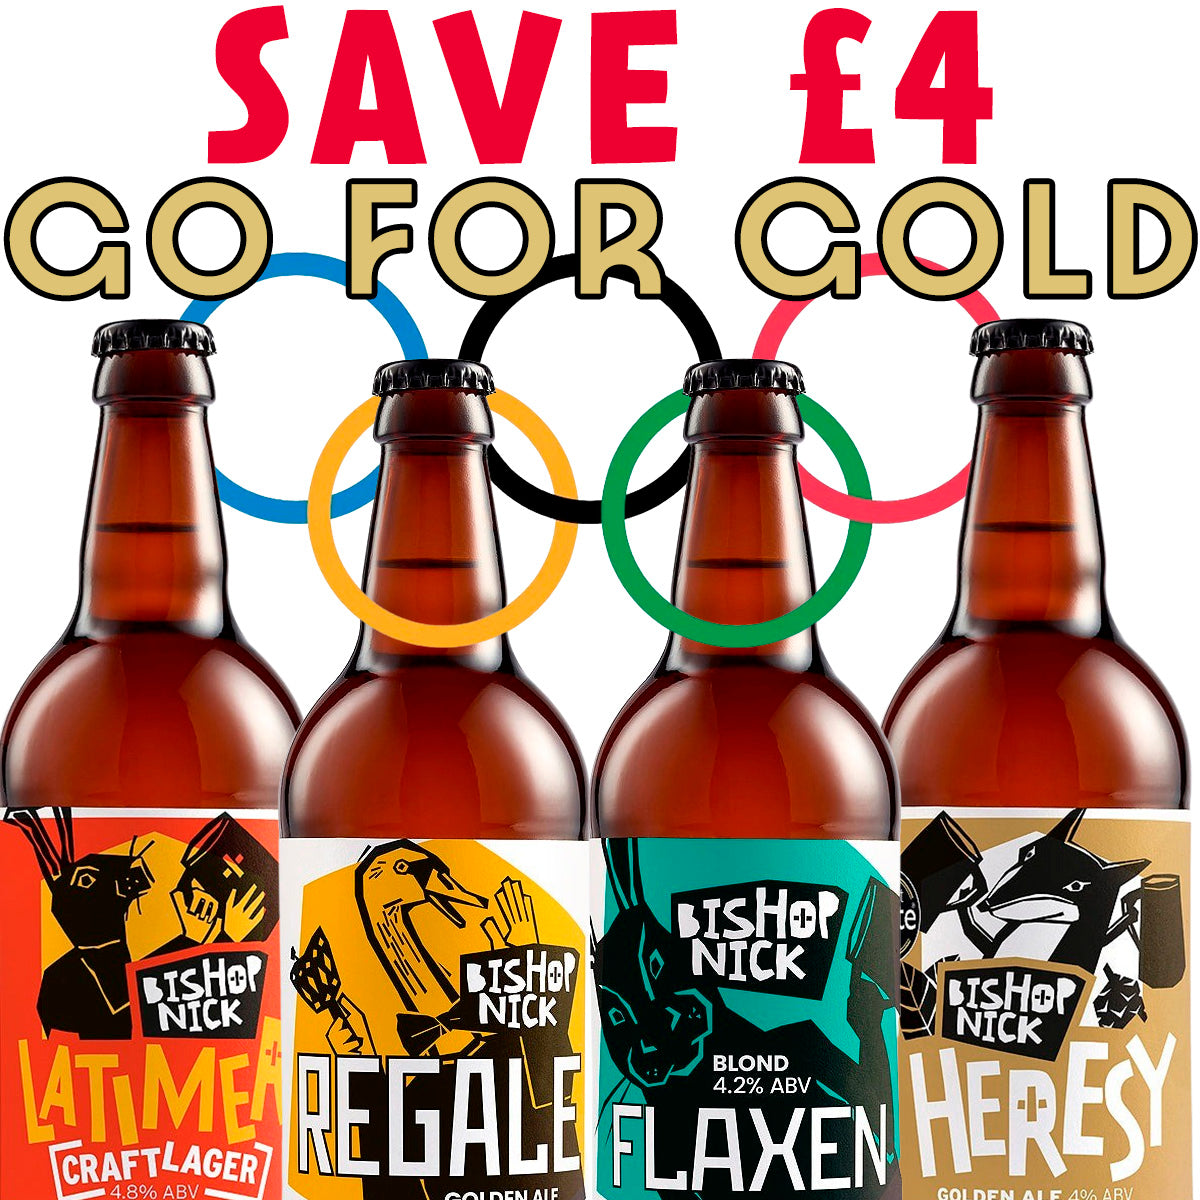 Olympic Gold Mixed Case (12 x 500ml bottles)